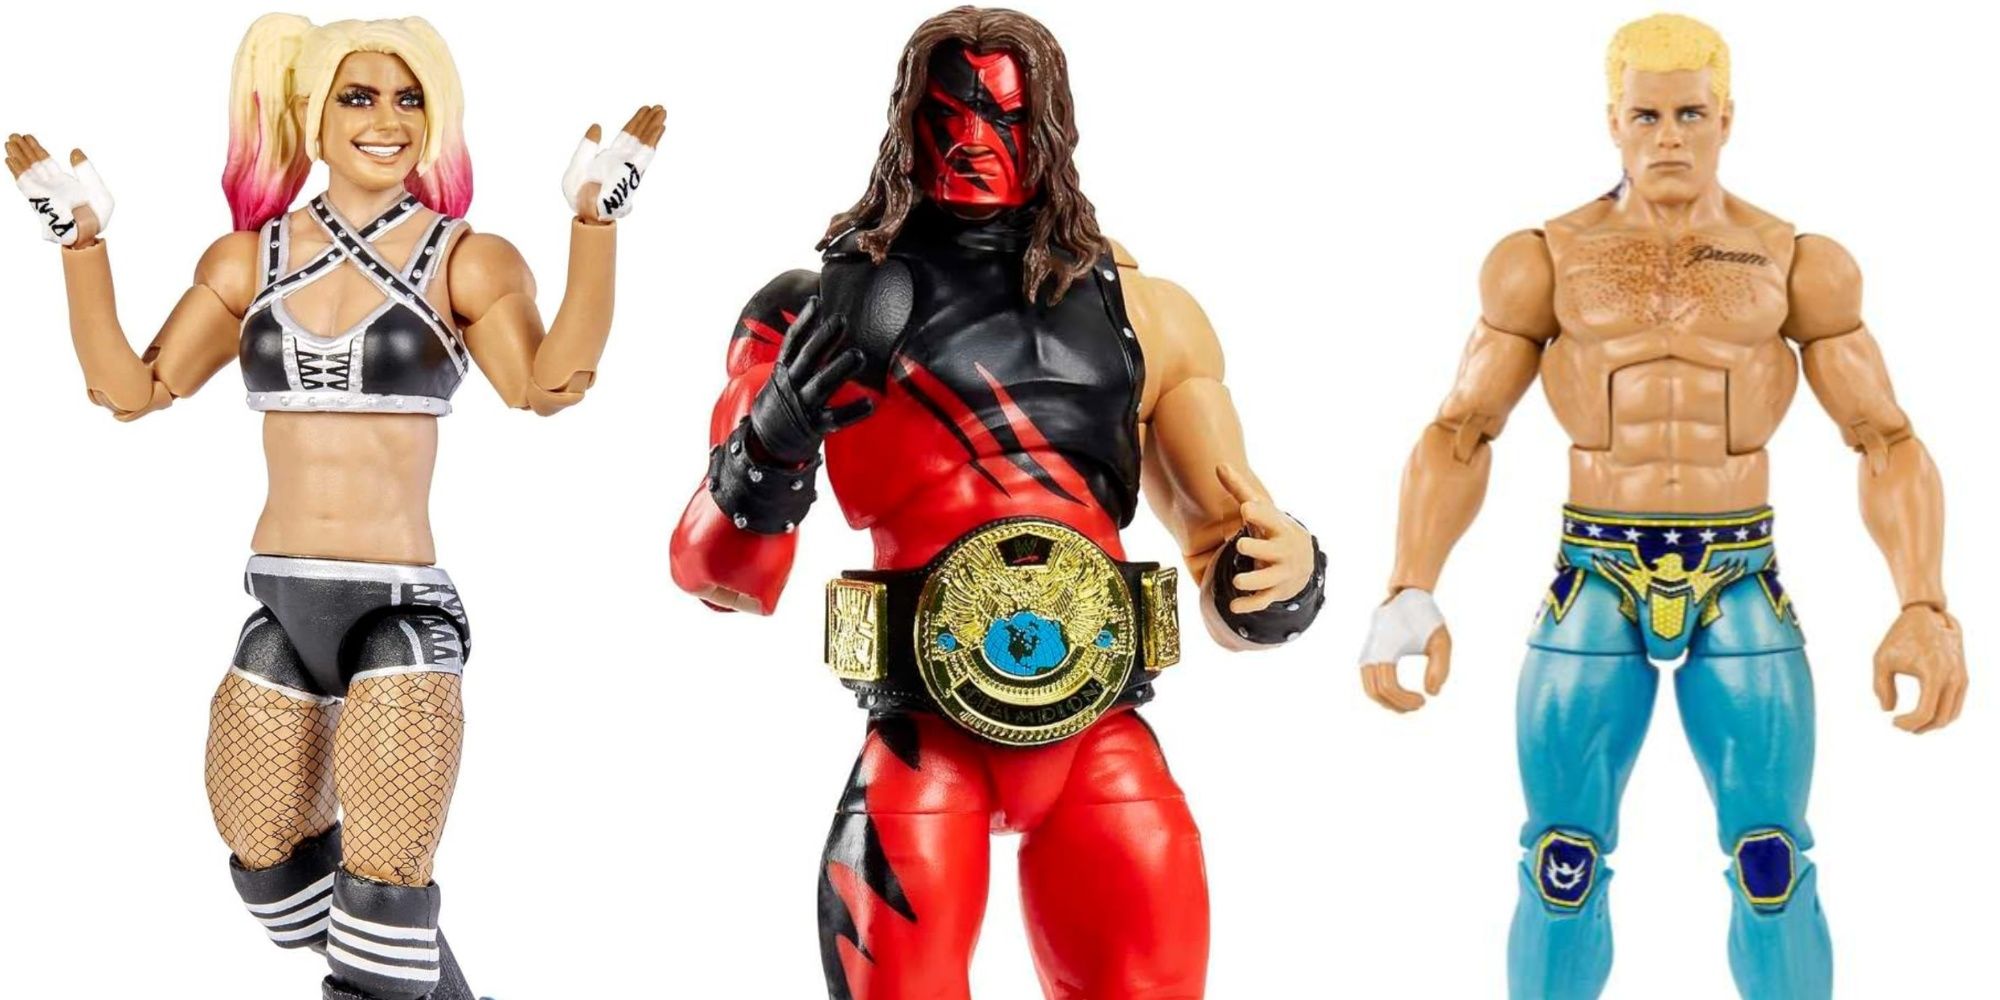 WWE Action Figures Featured Split Image Alexa Bliss, Kane, and Cody Rhodes